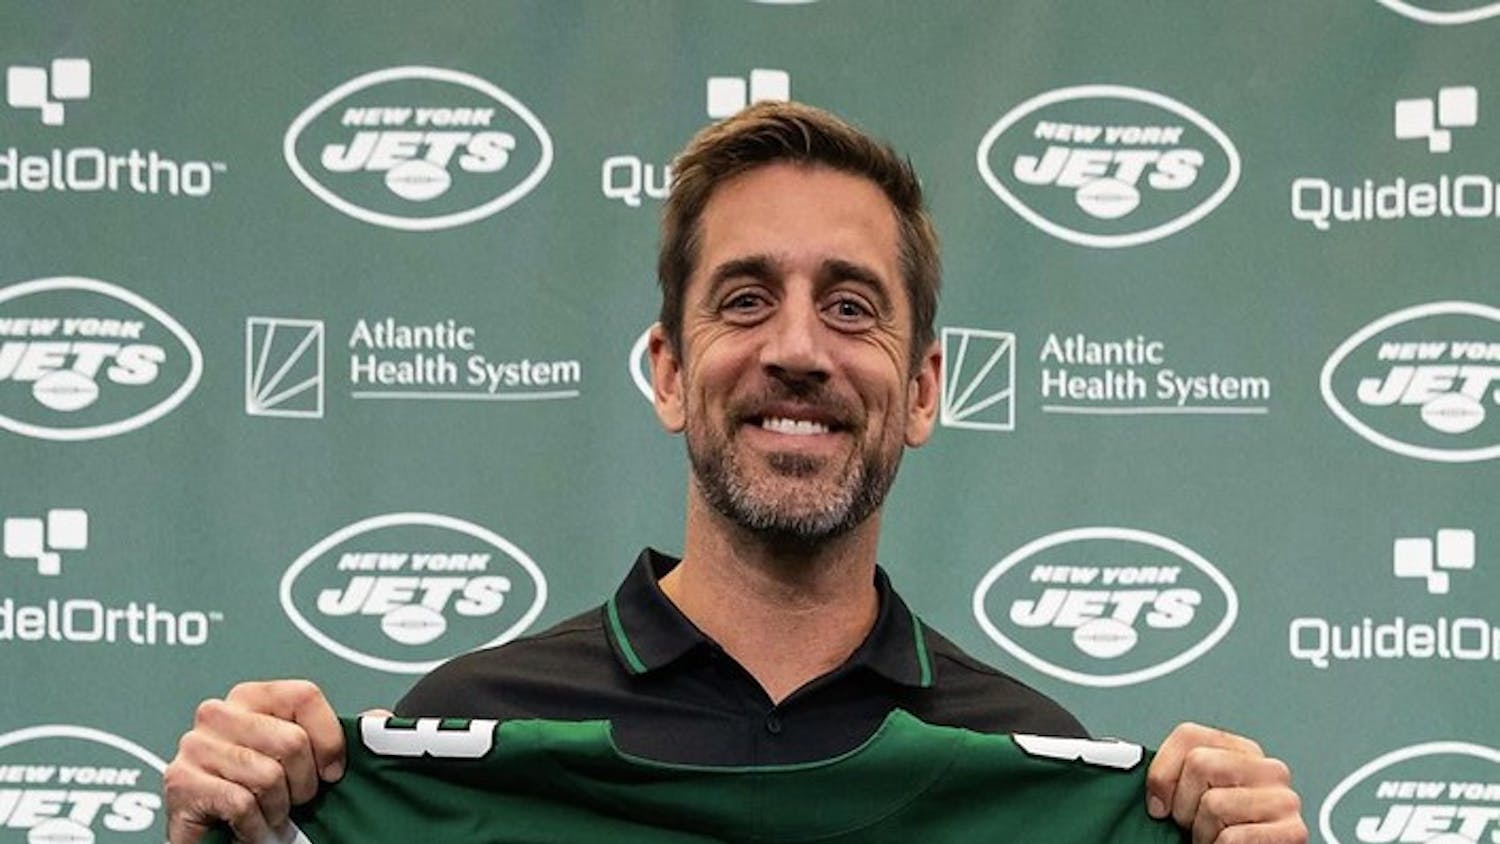 Jets new quarterback Aaron Rodgers at his introductory press conference on April 26, 2023 (Photo Courtesy of MikeyStrikes/Flickr).